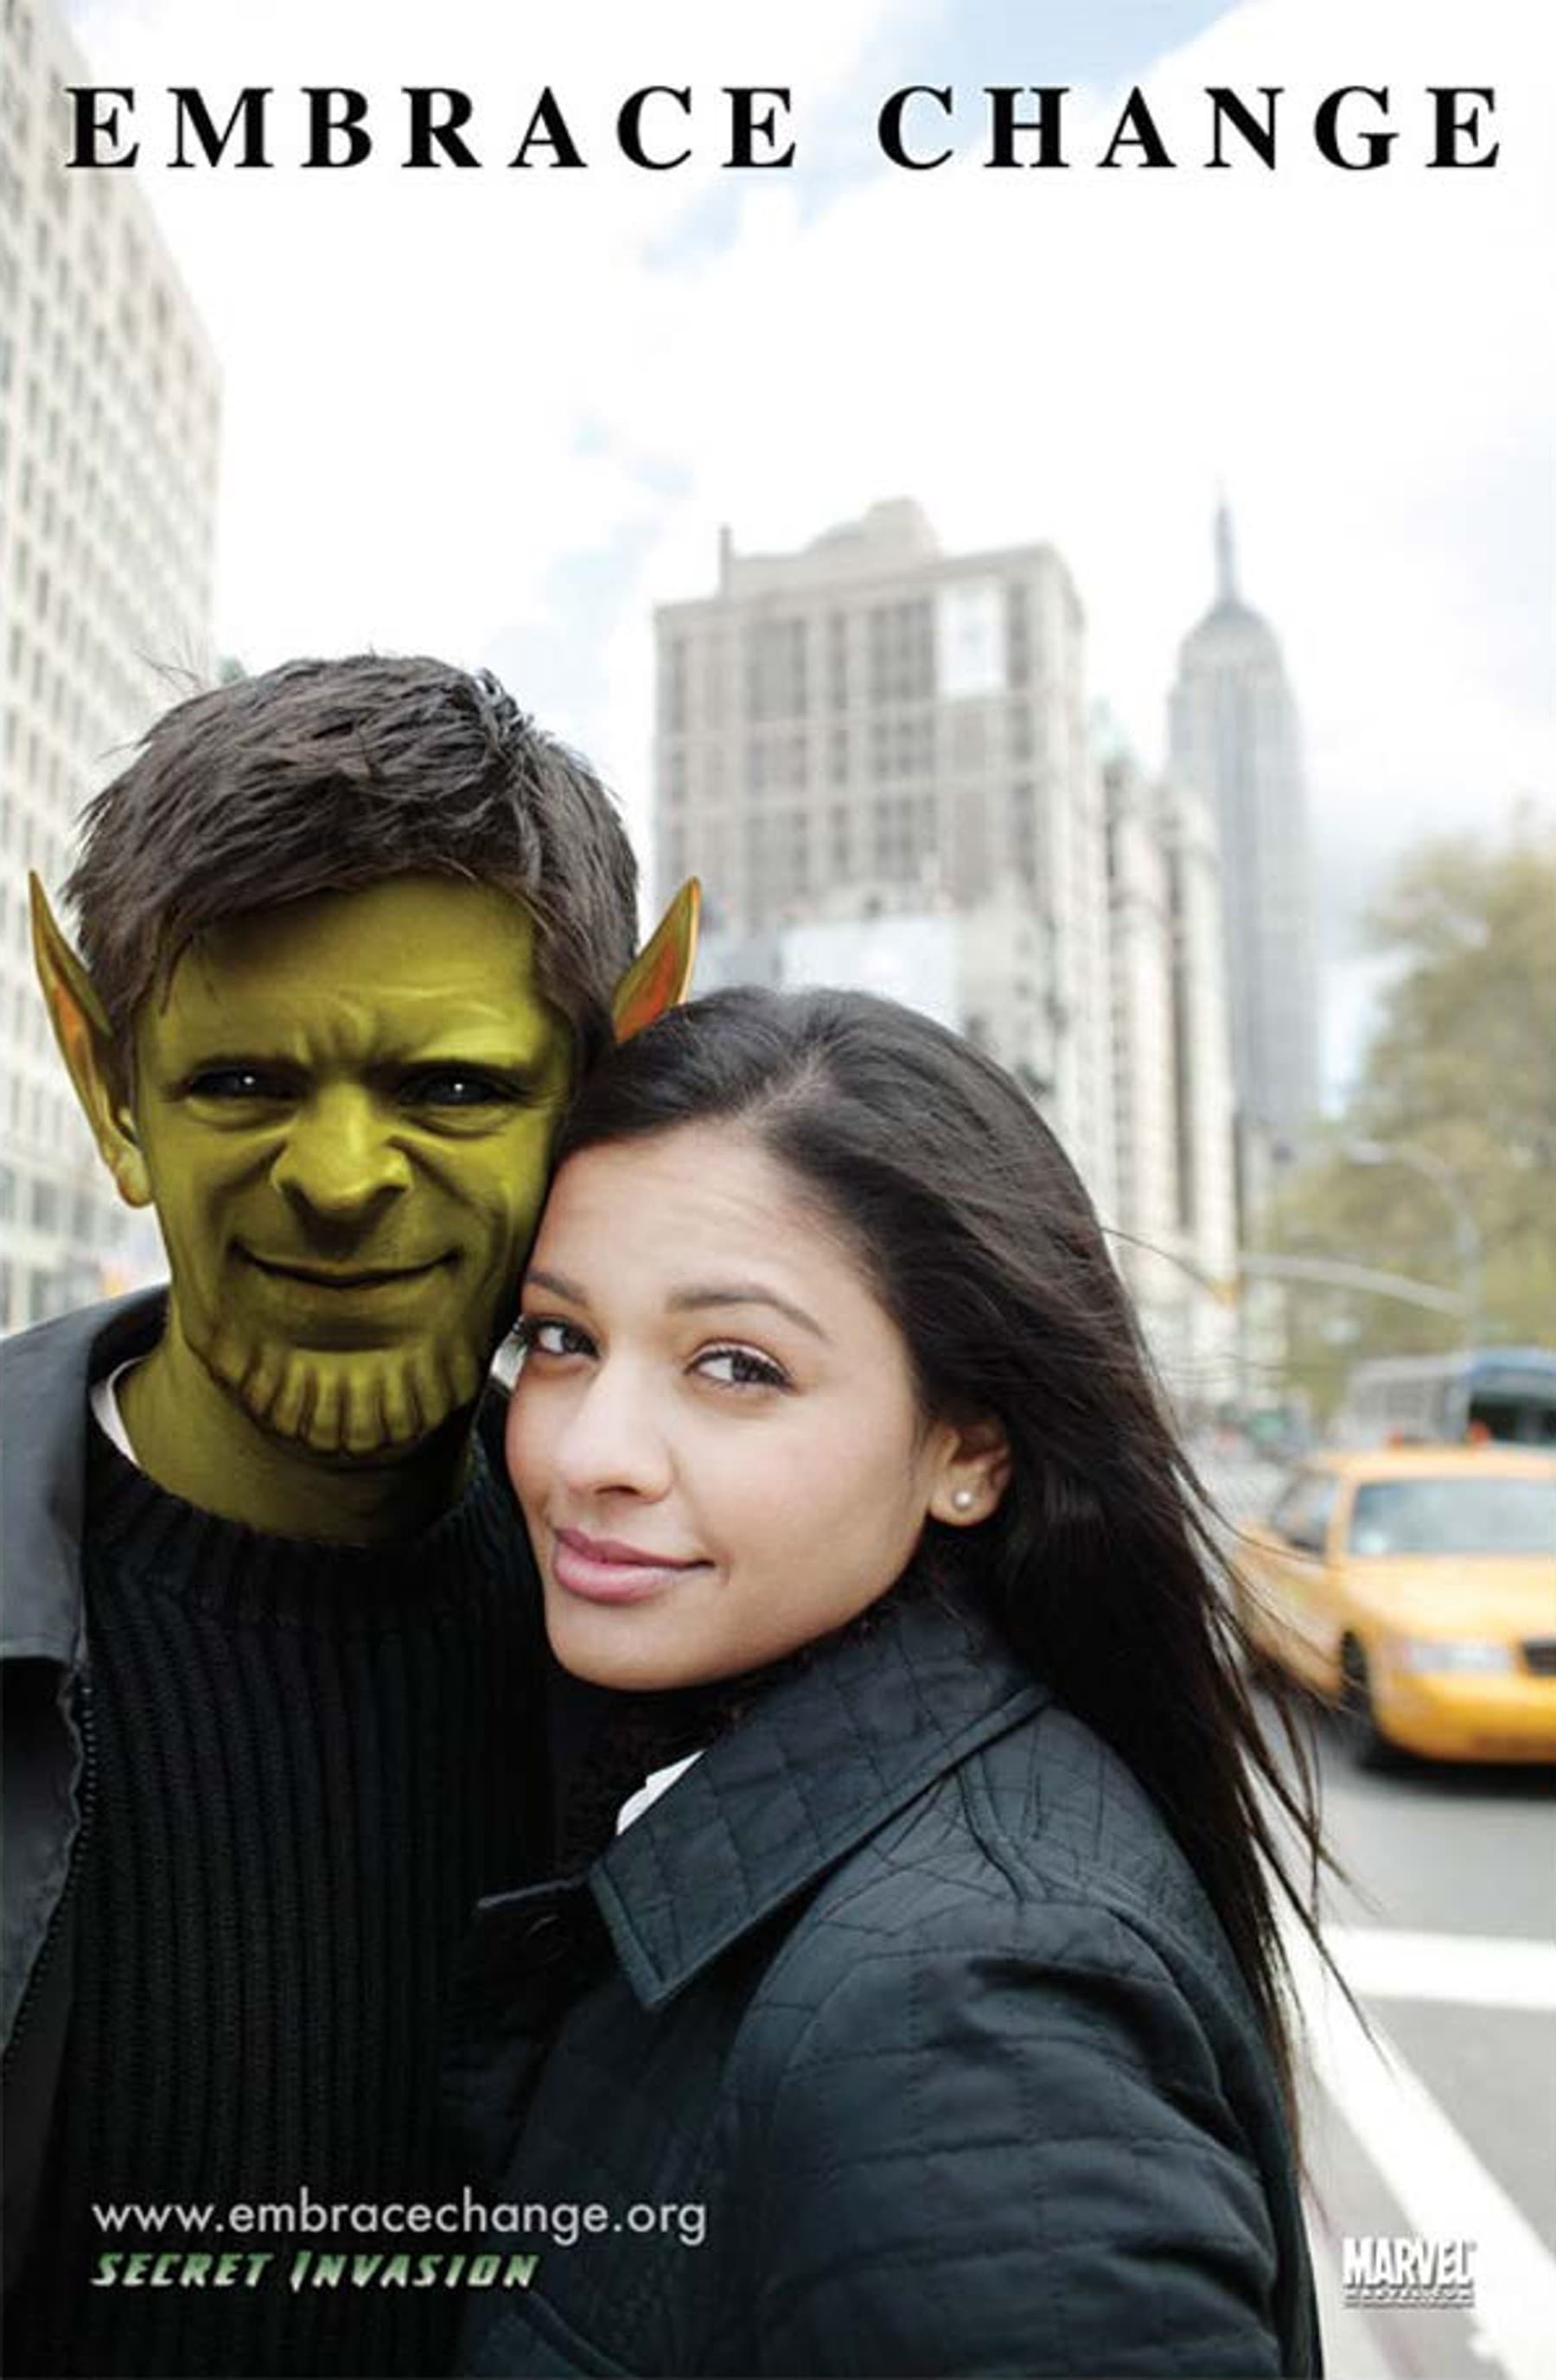 Embrace Change Promotional Image: A Skrull Man and Human Woman Stand Cheek-to-Cheek